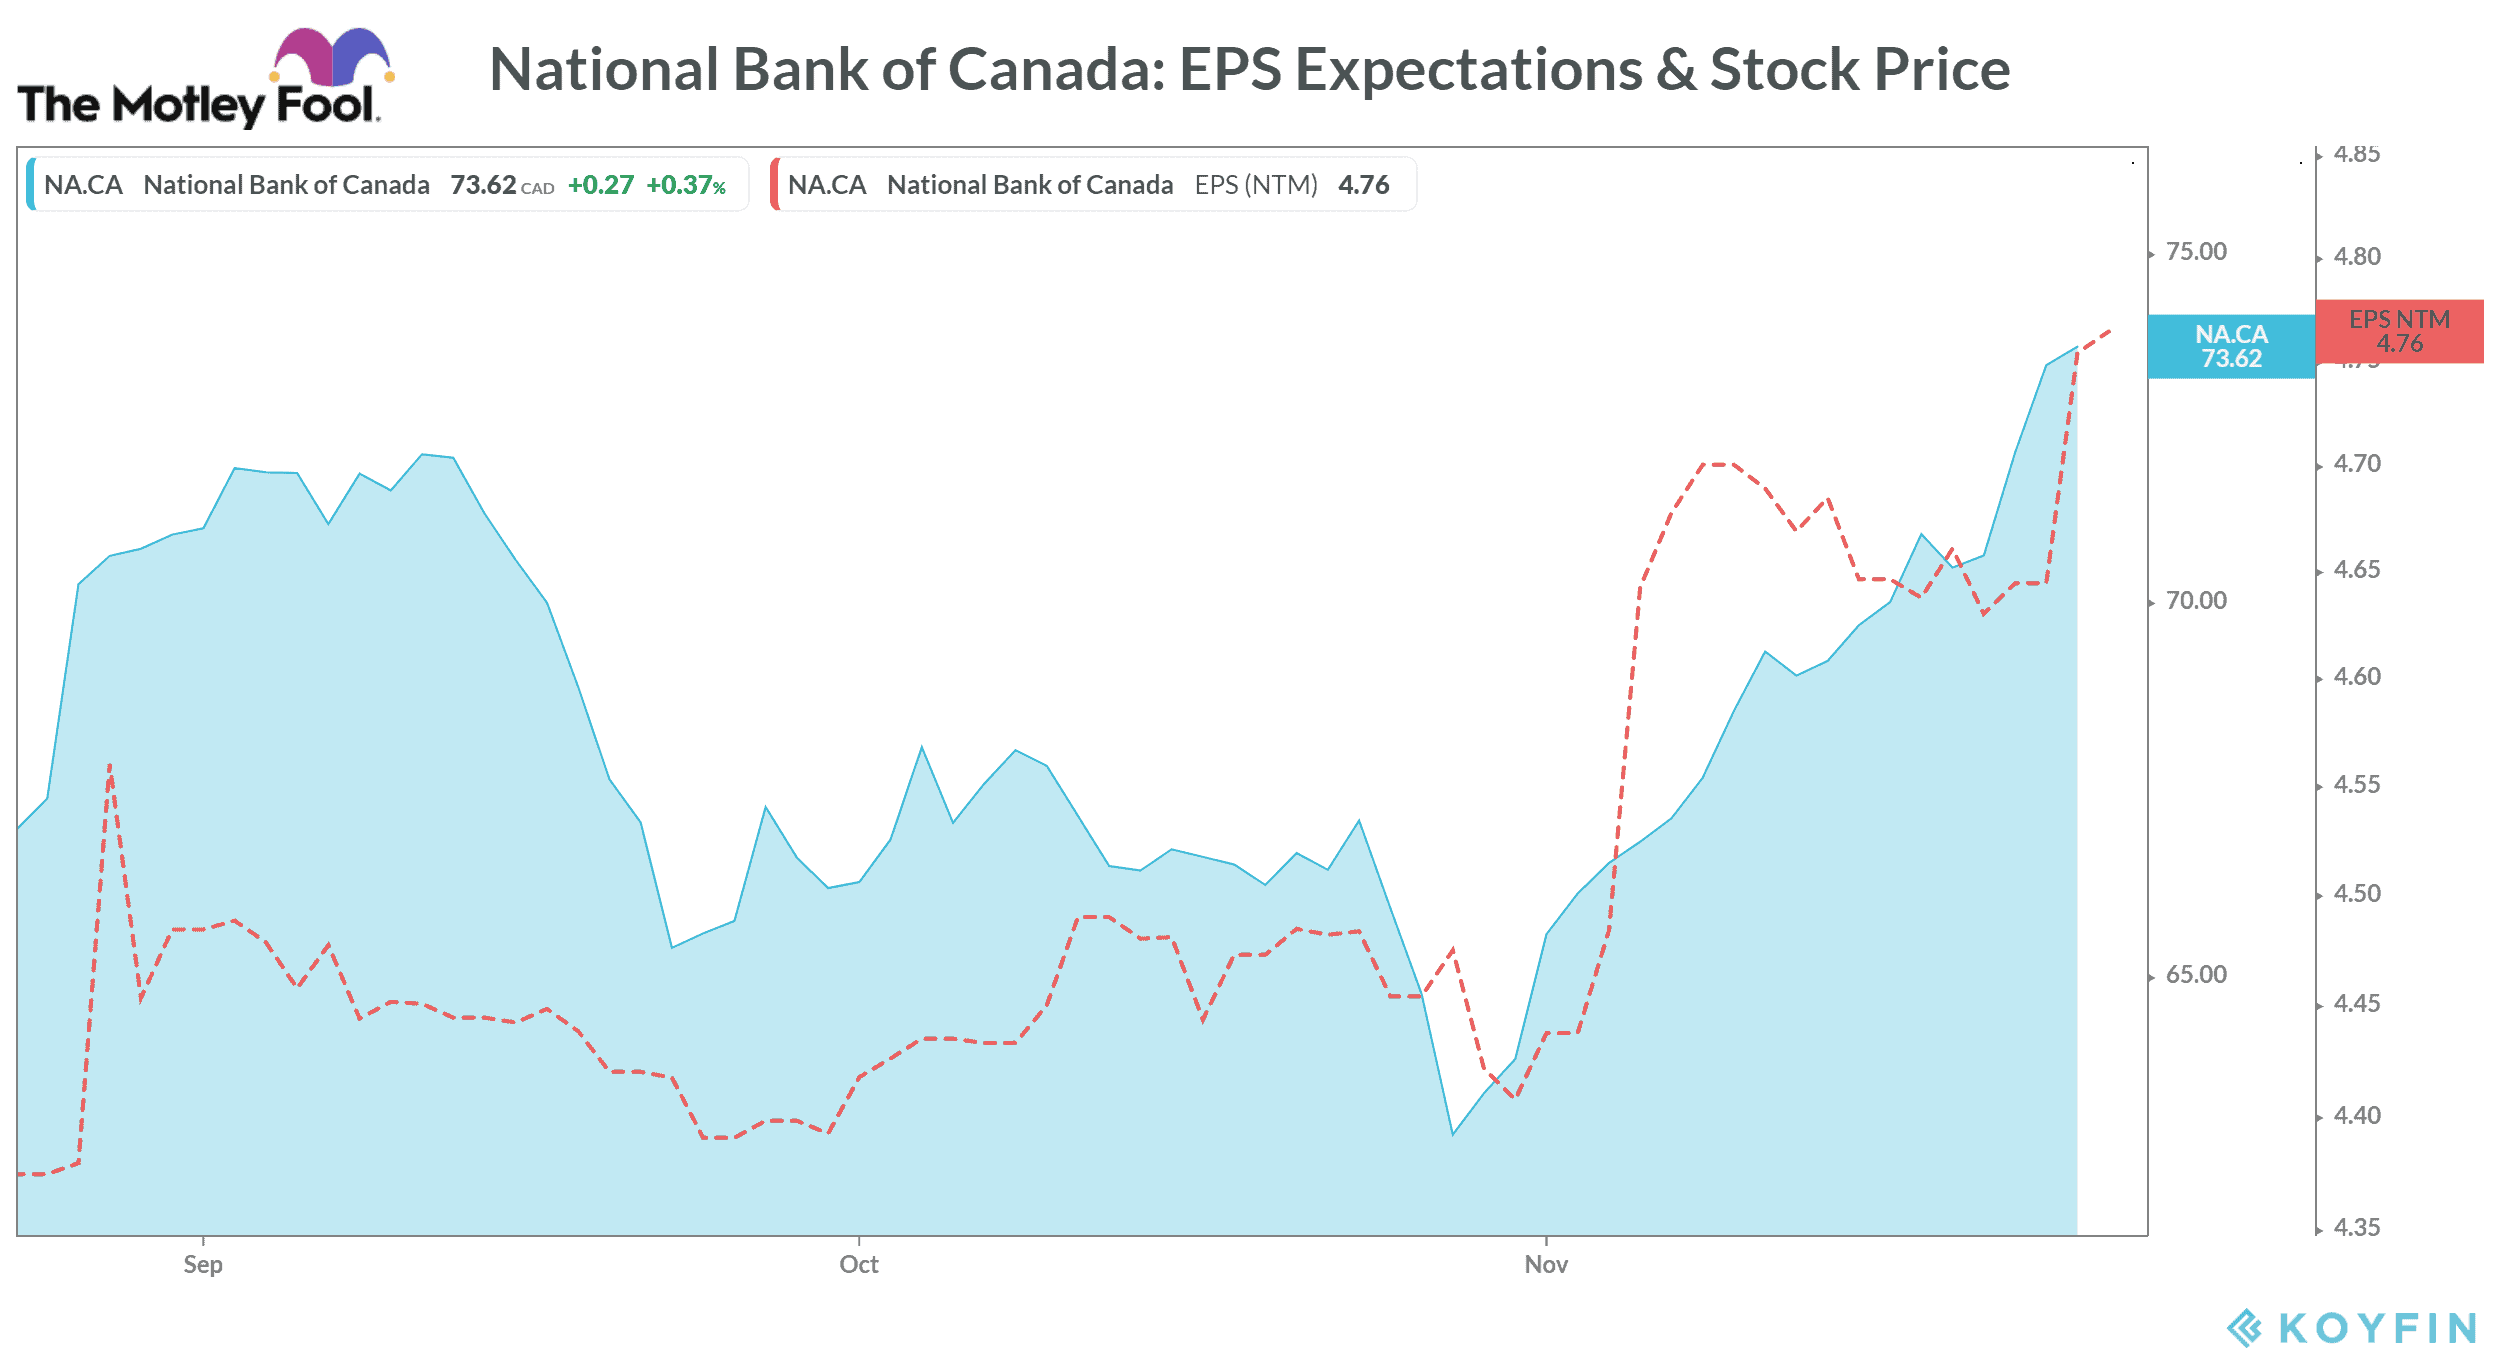 National Bank of Canada EPS Expectations & Stock Price